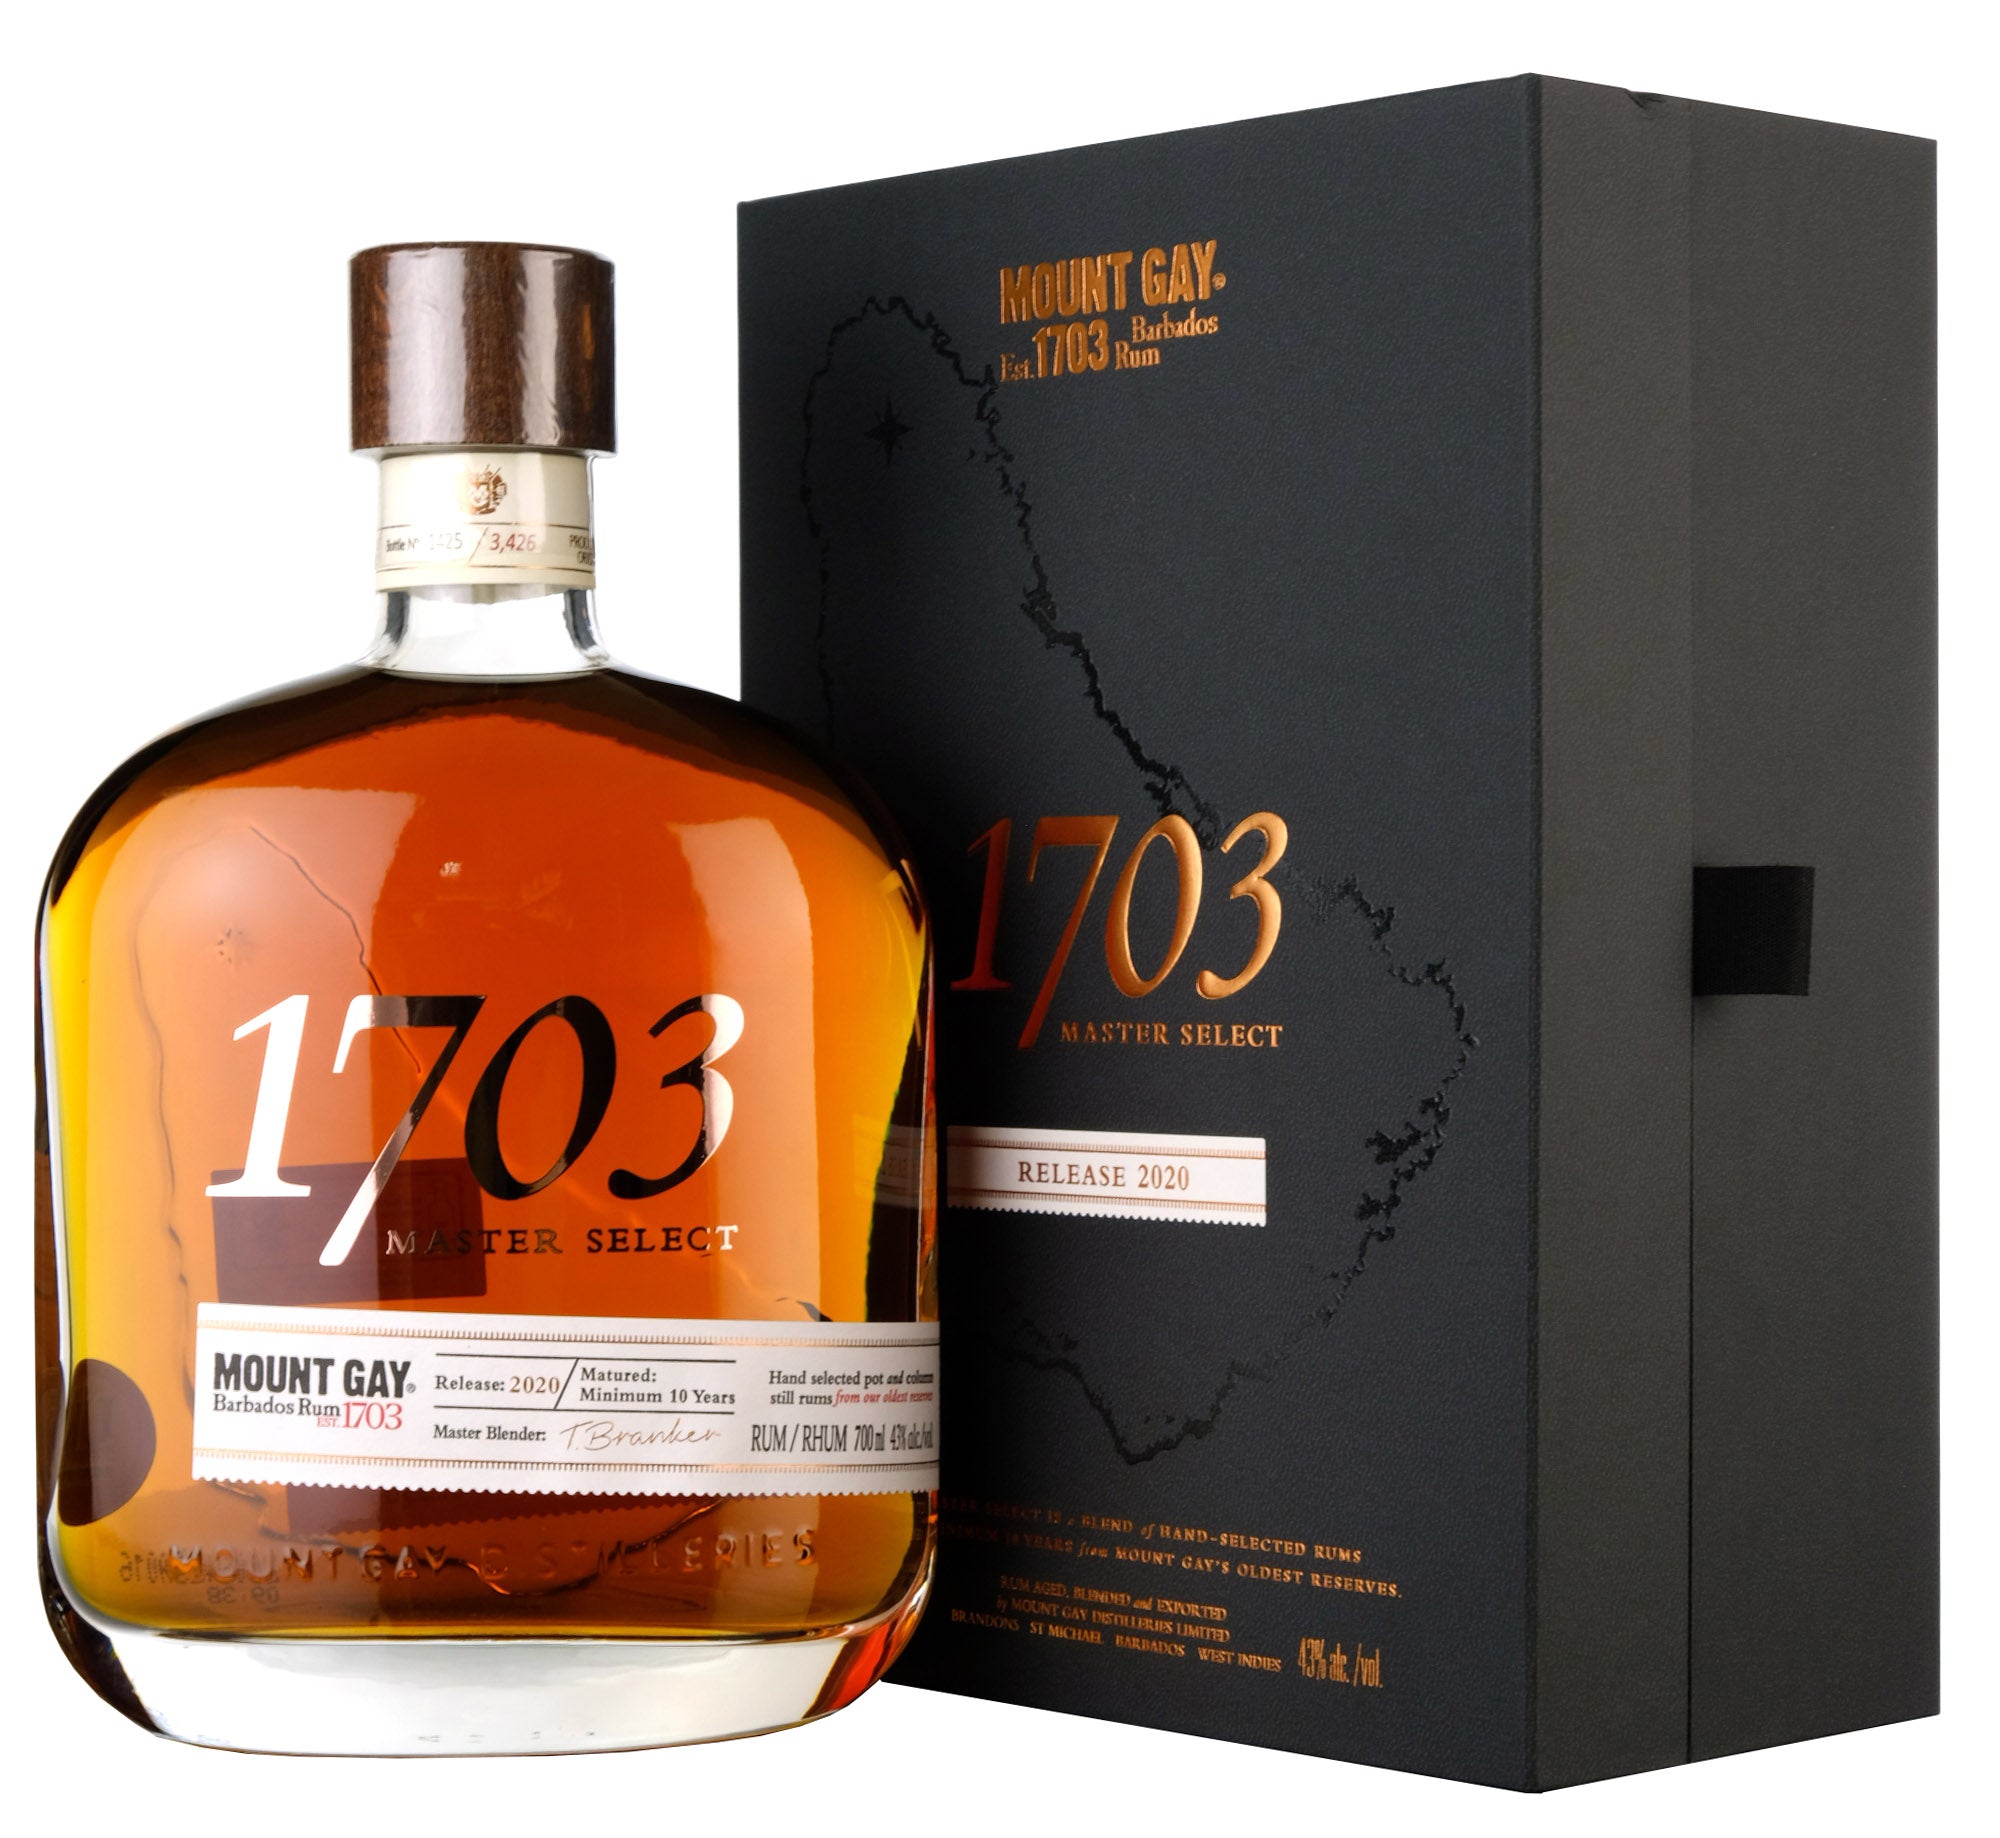 Mount Gay 1703 Master Select 2020 Release